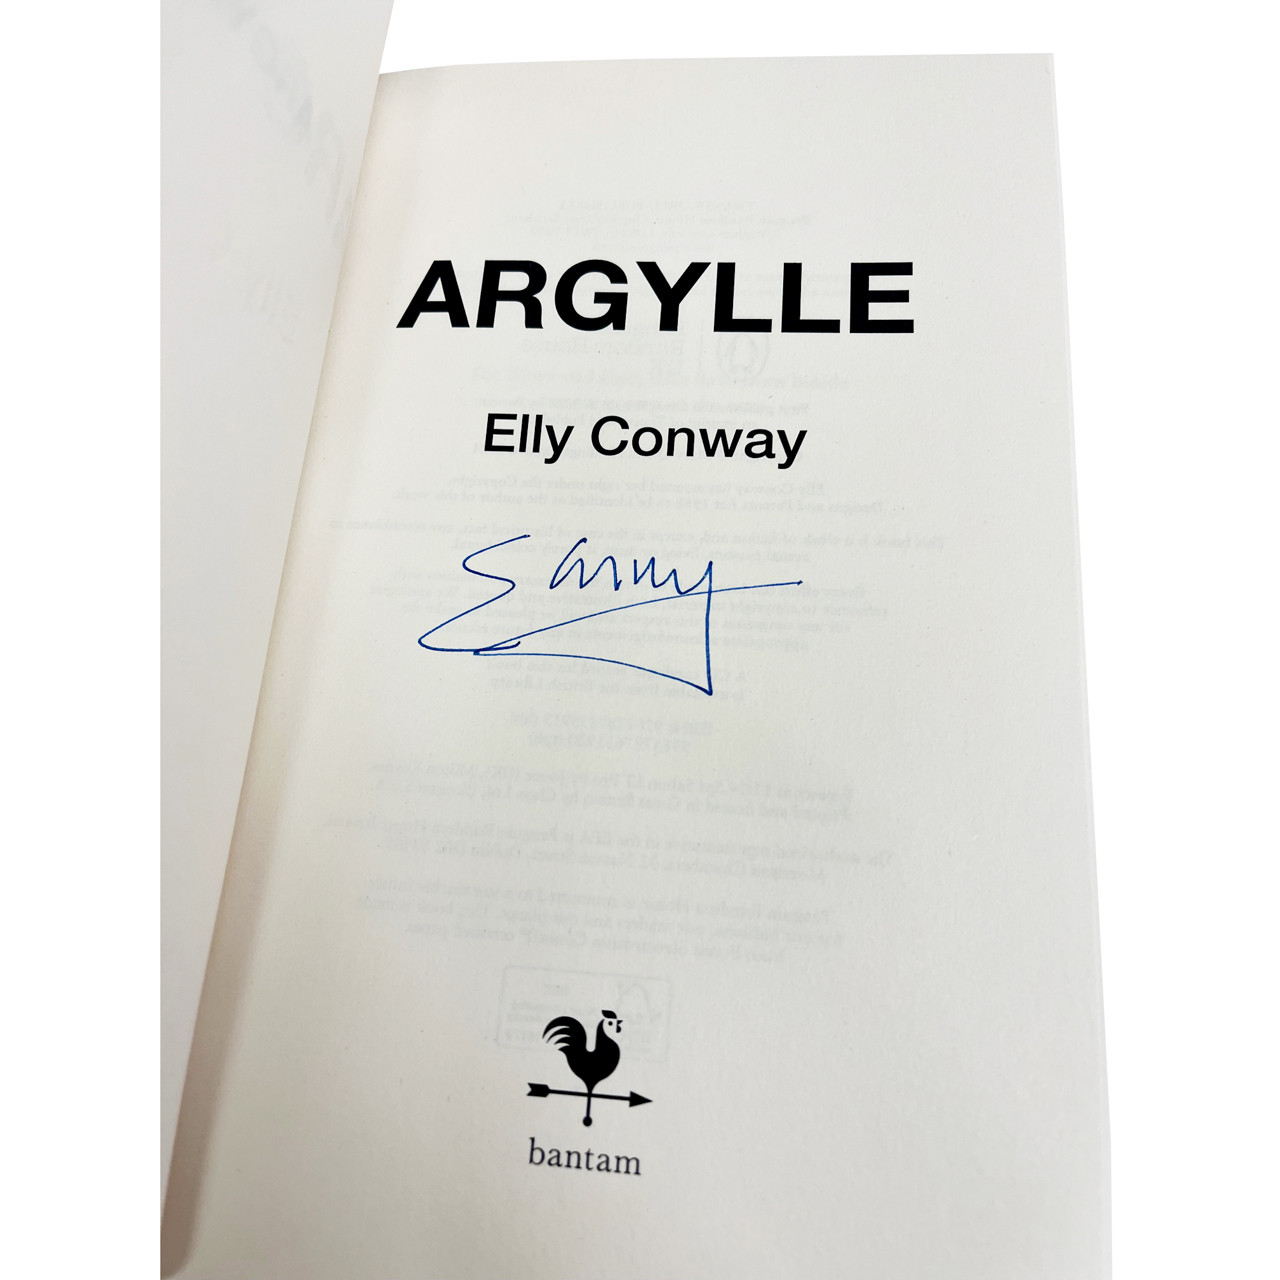 Elly Conway "Argylle" Slipcased UK Signed First Edition w/COA [Very Fine/Sealed]